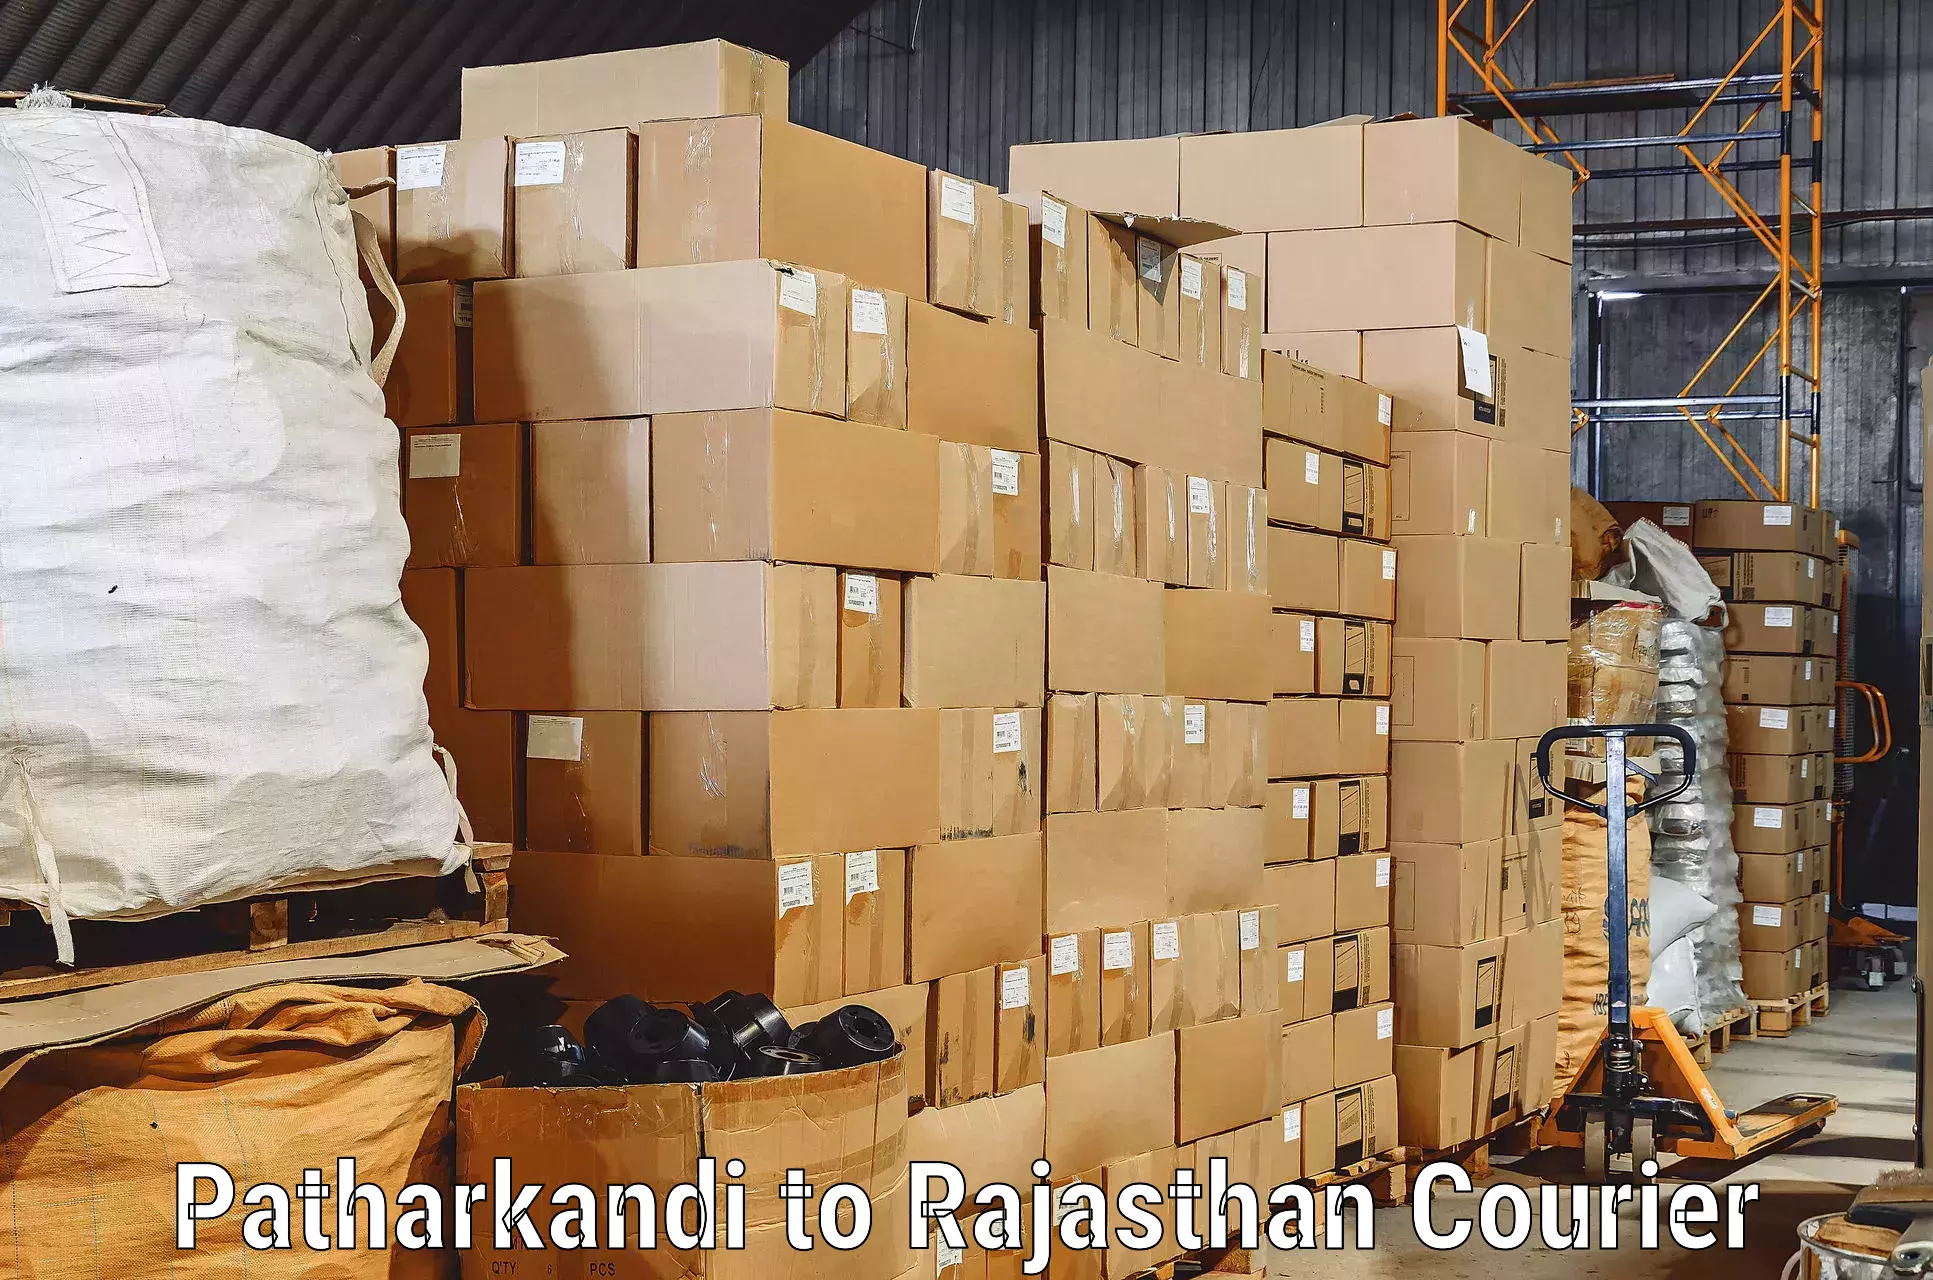 Professional movers and packers Patharkandi to Udaipur